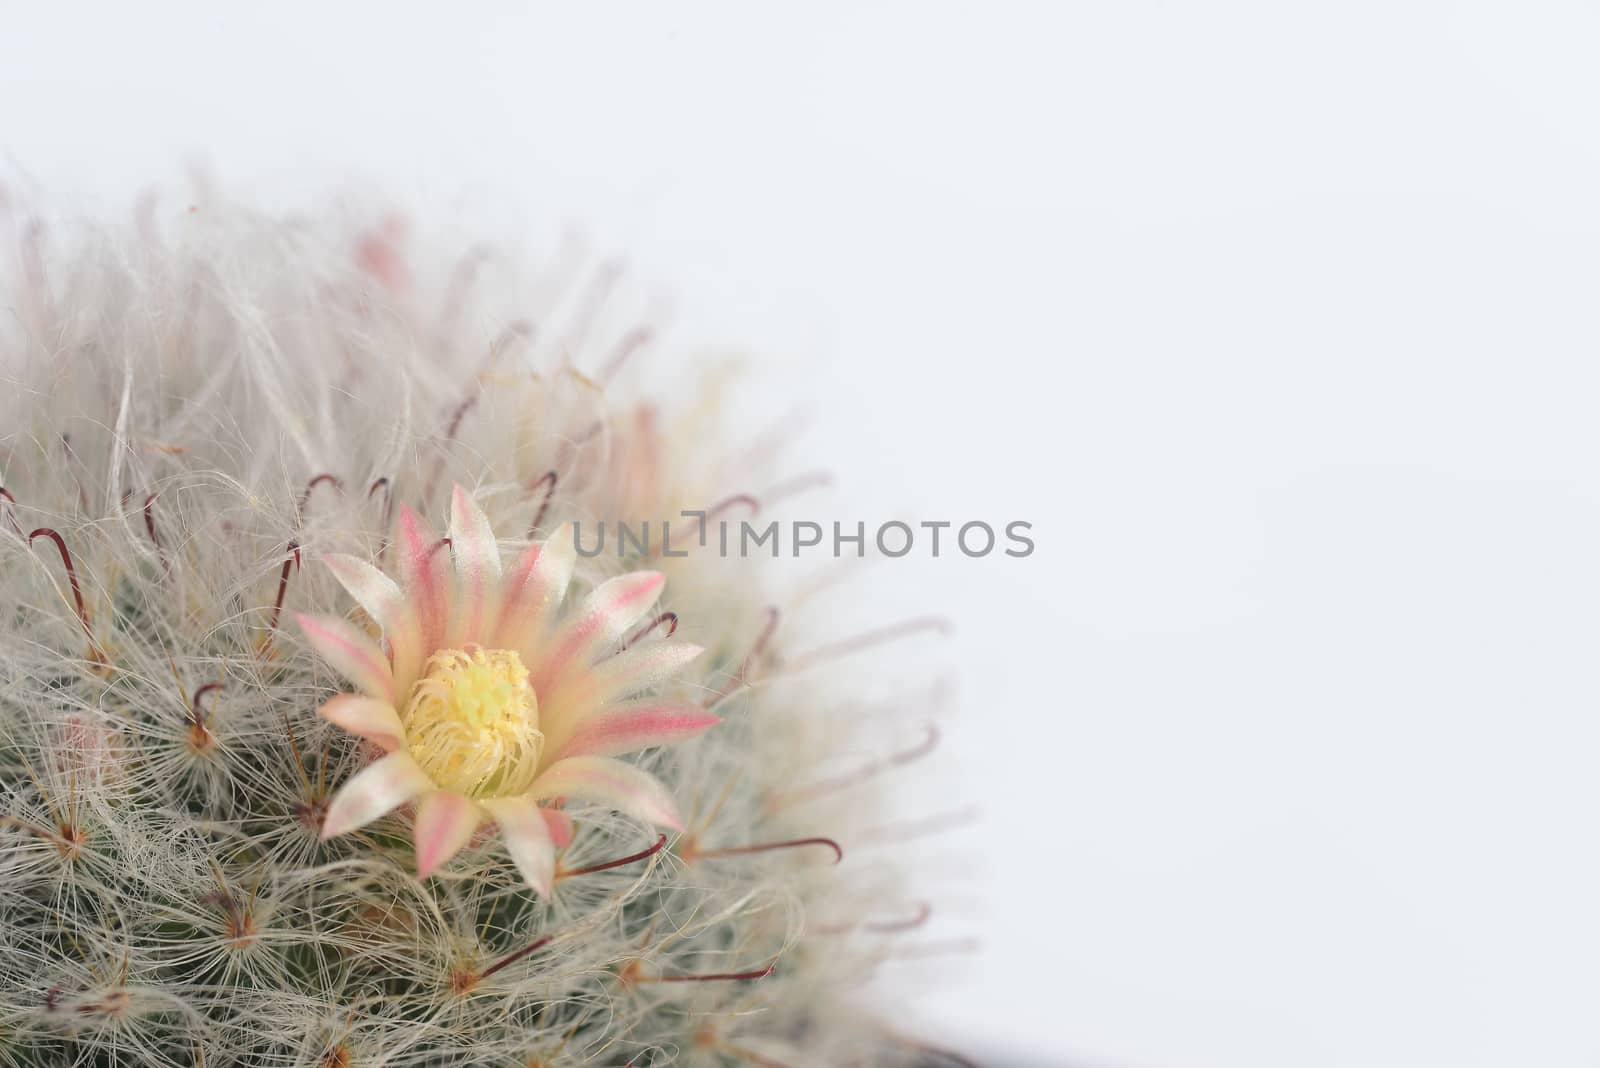 mammillaria boscana or Fishhooks, Pink flower Powder-puff Cactus, Pink flowered Snowball Cactus by ideation90